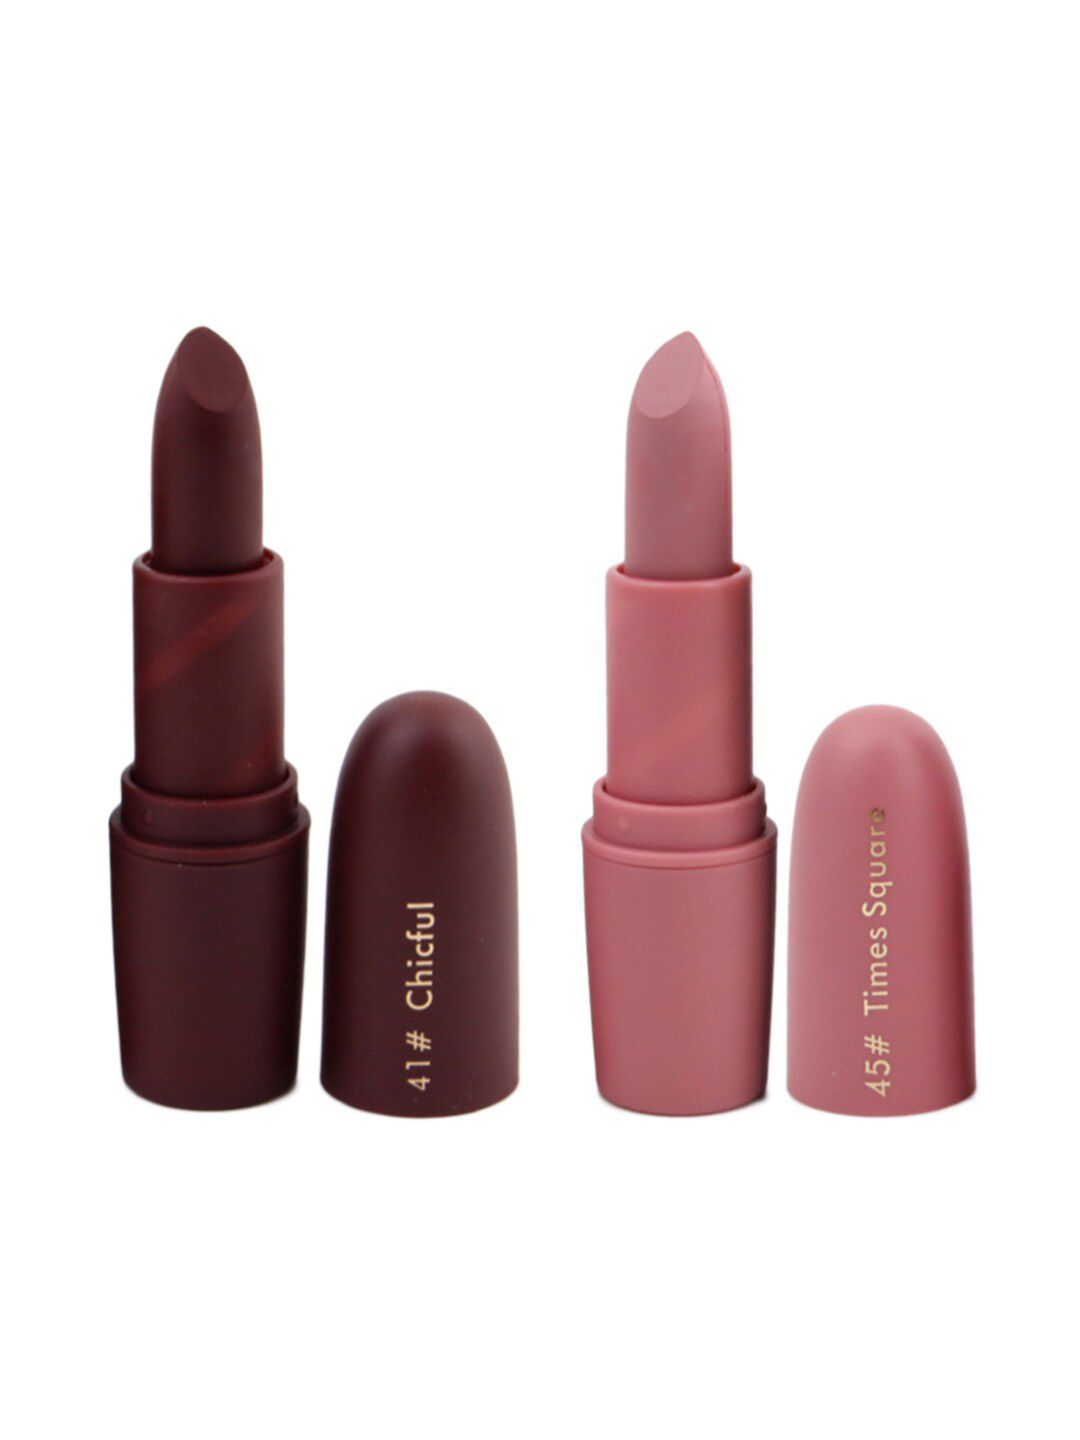 MISS ROSE Set of 2 Matte Creamy Lipsticks - Chicful 41 & Times Square 45 Price in India